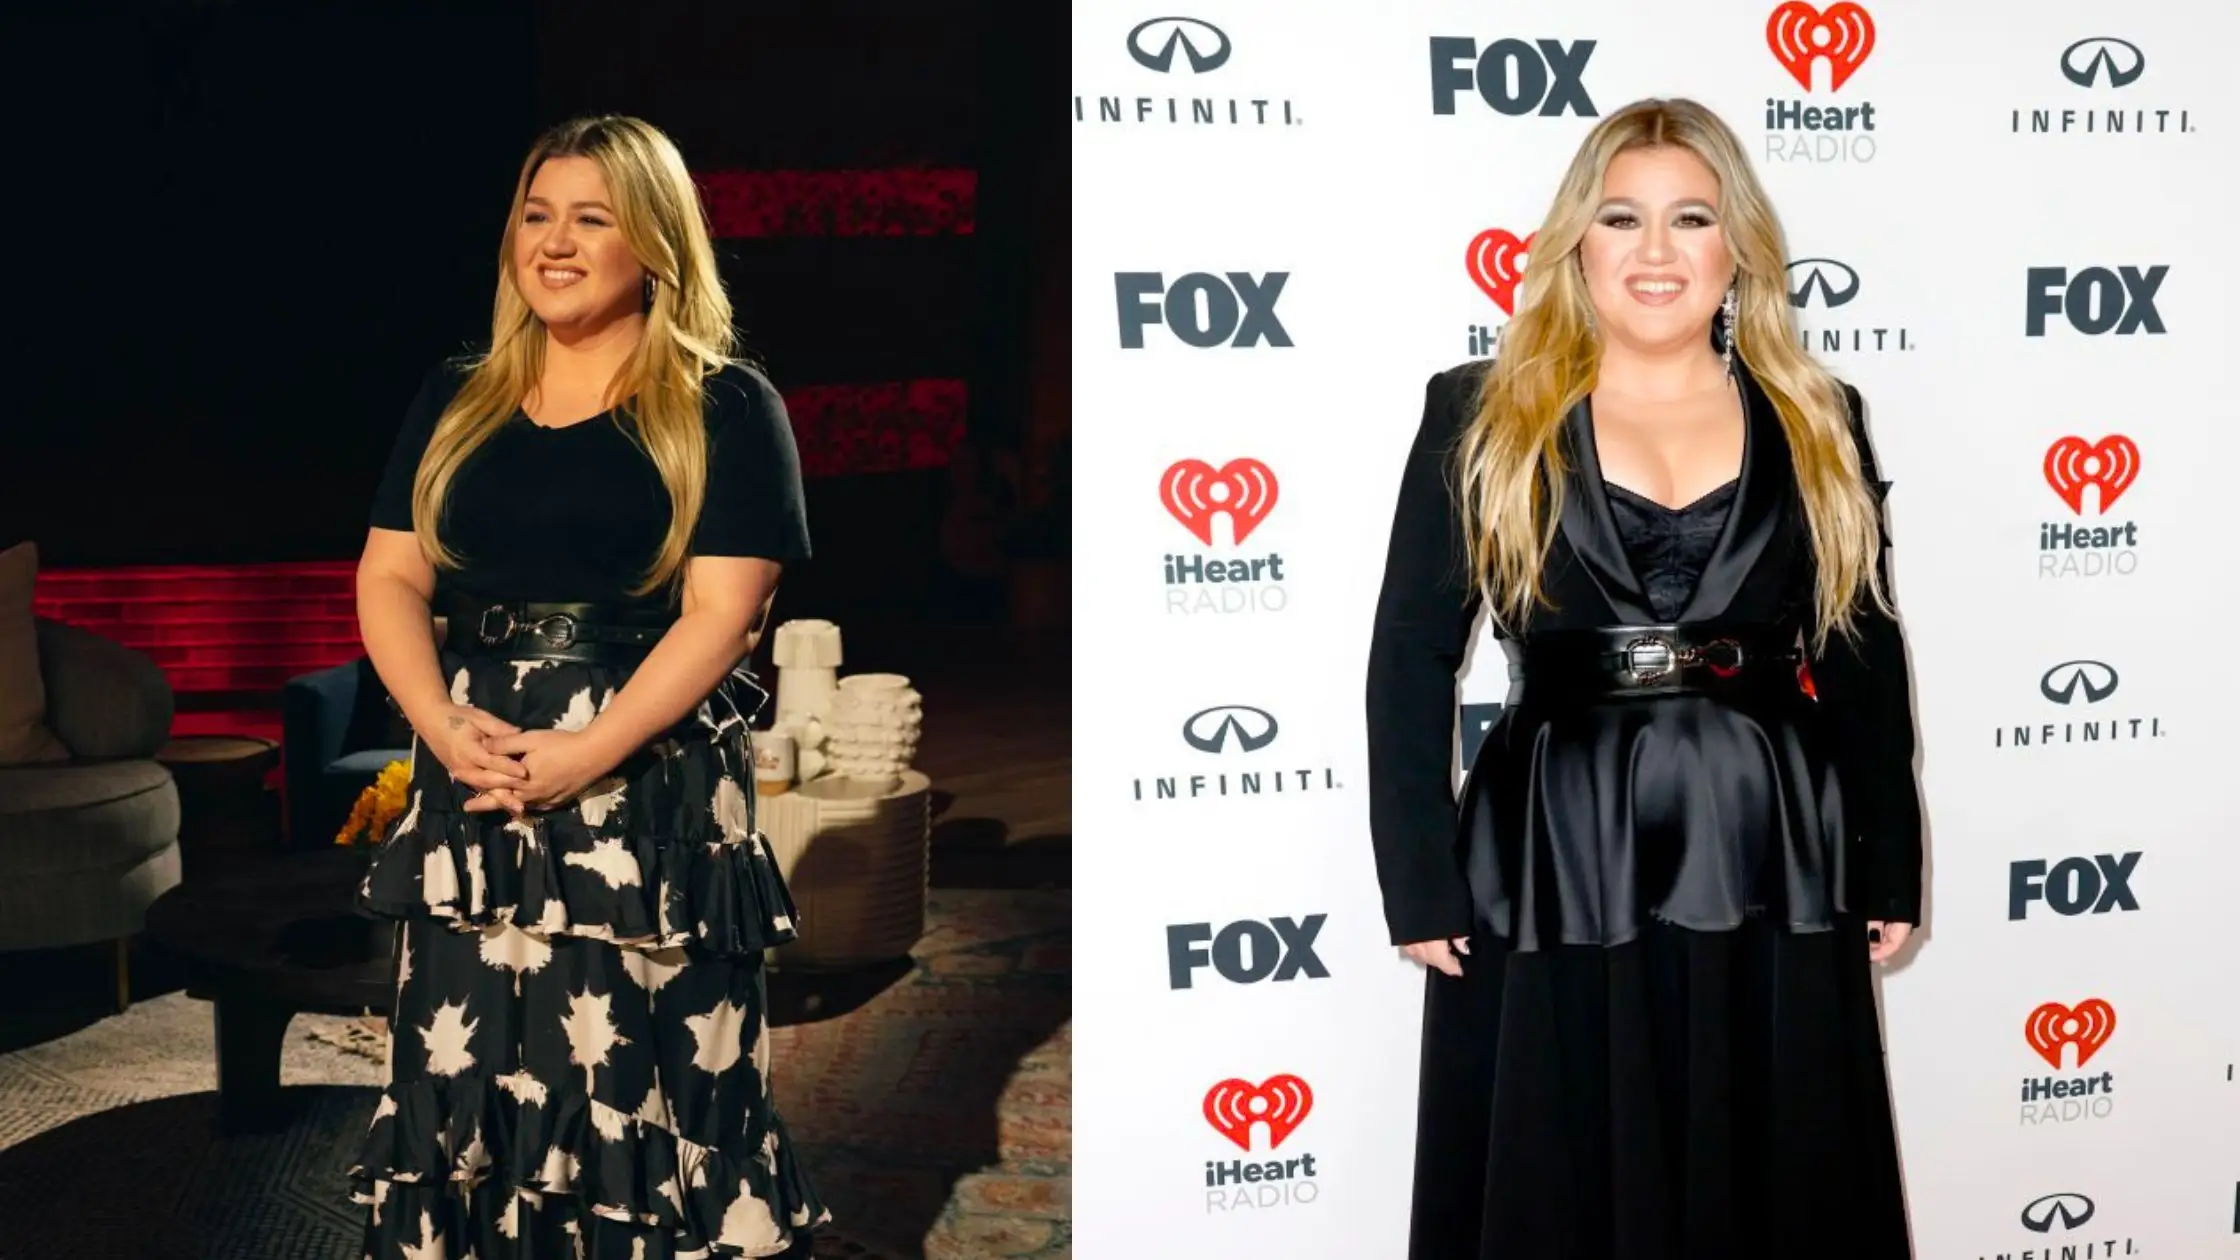 Weight loss tips from Kelly Clarkson